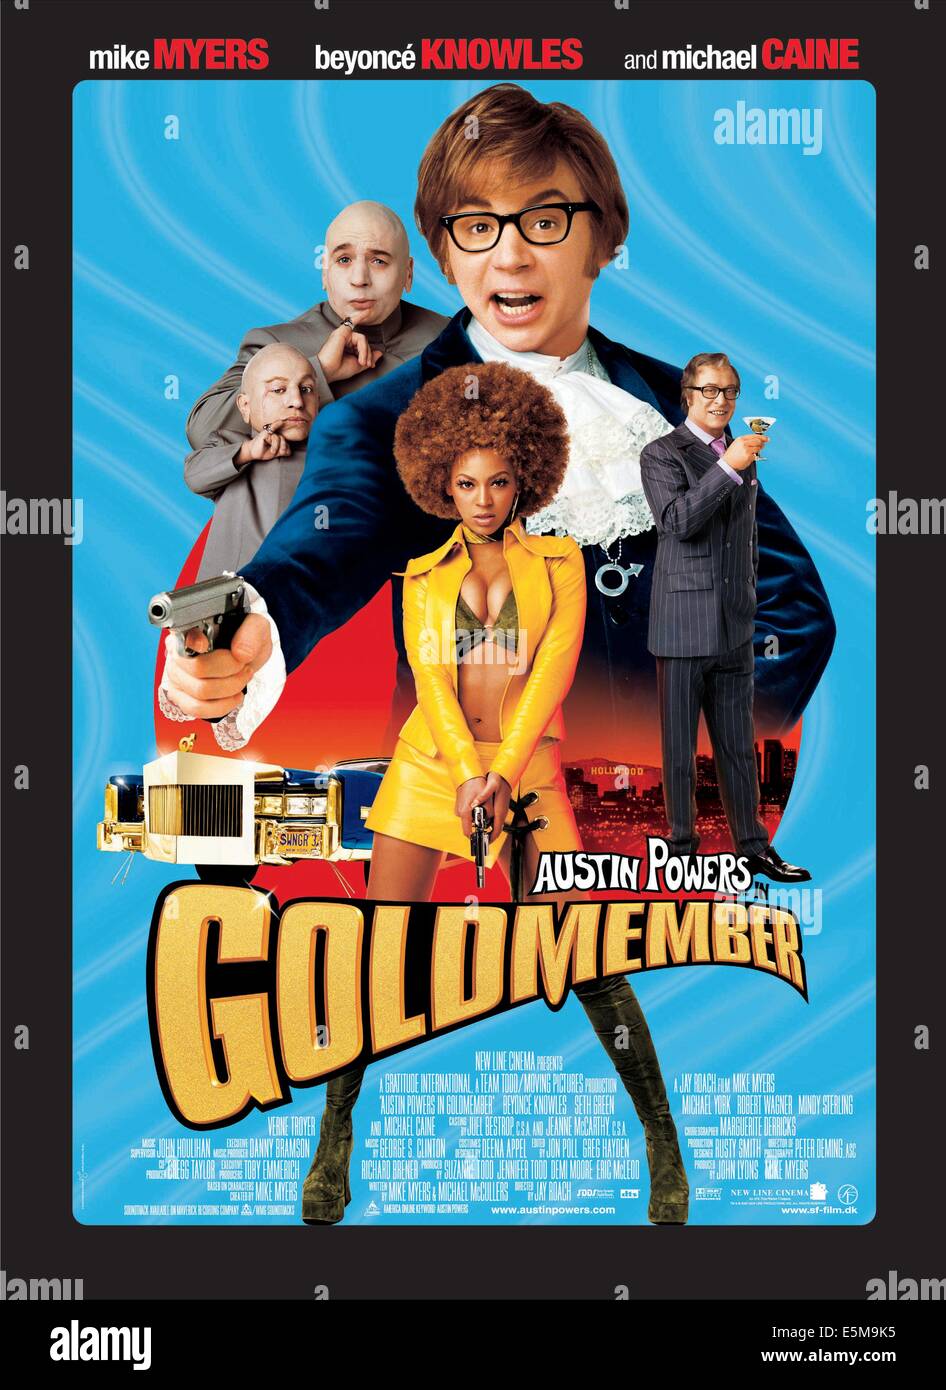 AUSTIN POWERS IN GOLDMEMBER, posteriore da sinistra: Verne Troyer, Mike Myers, Mike Myers, Michael Caine, Beyonce Knowles (anteriore), Foto Stock